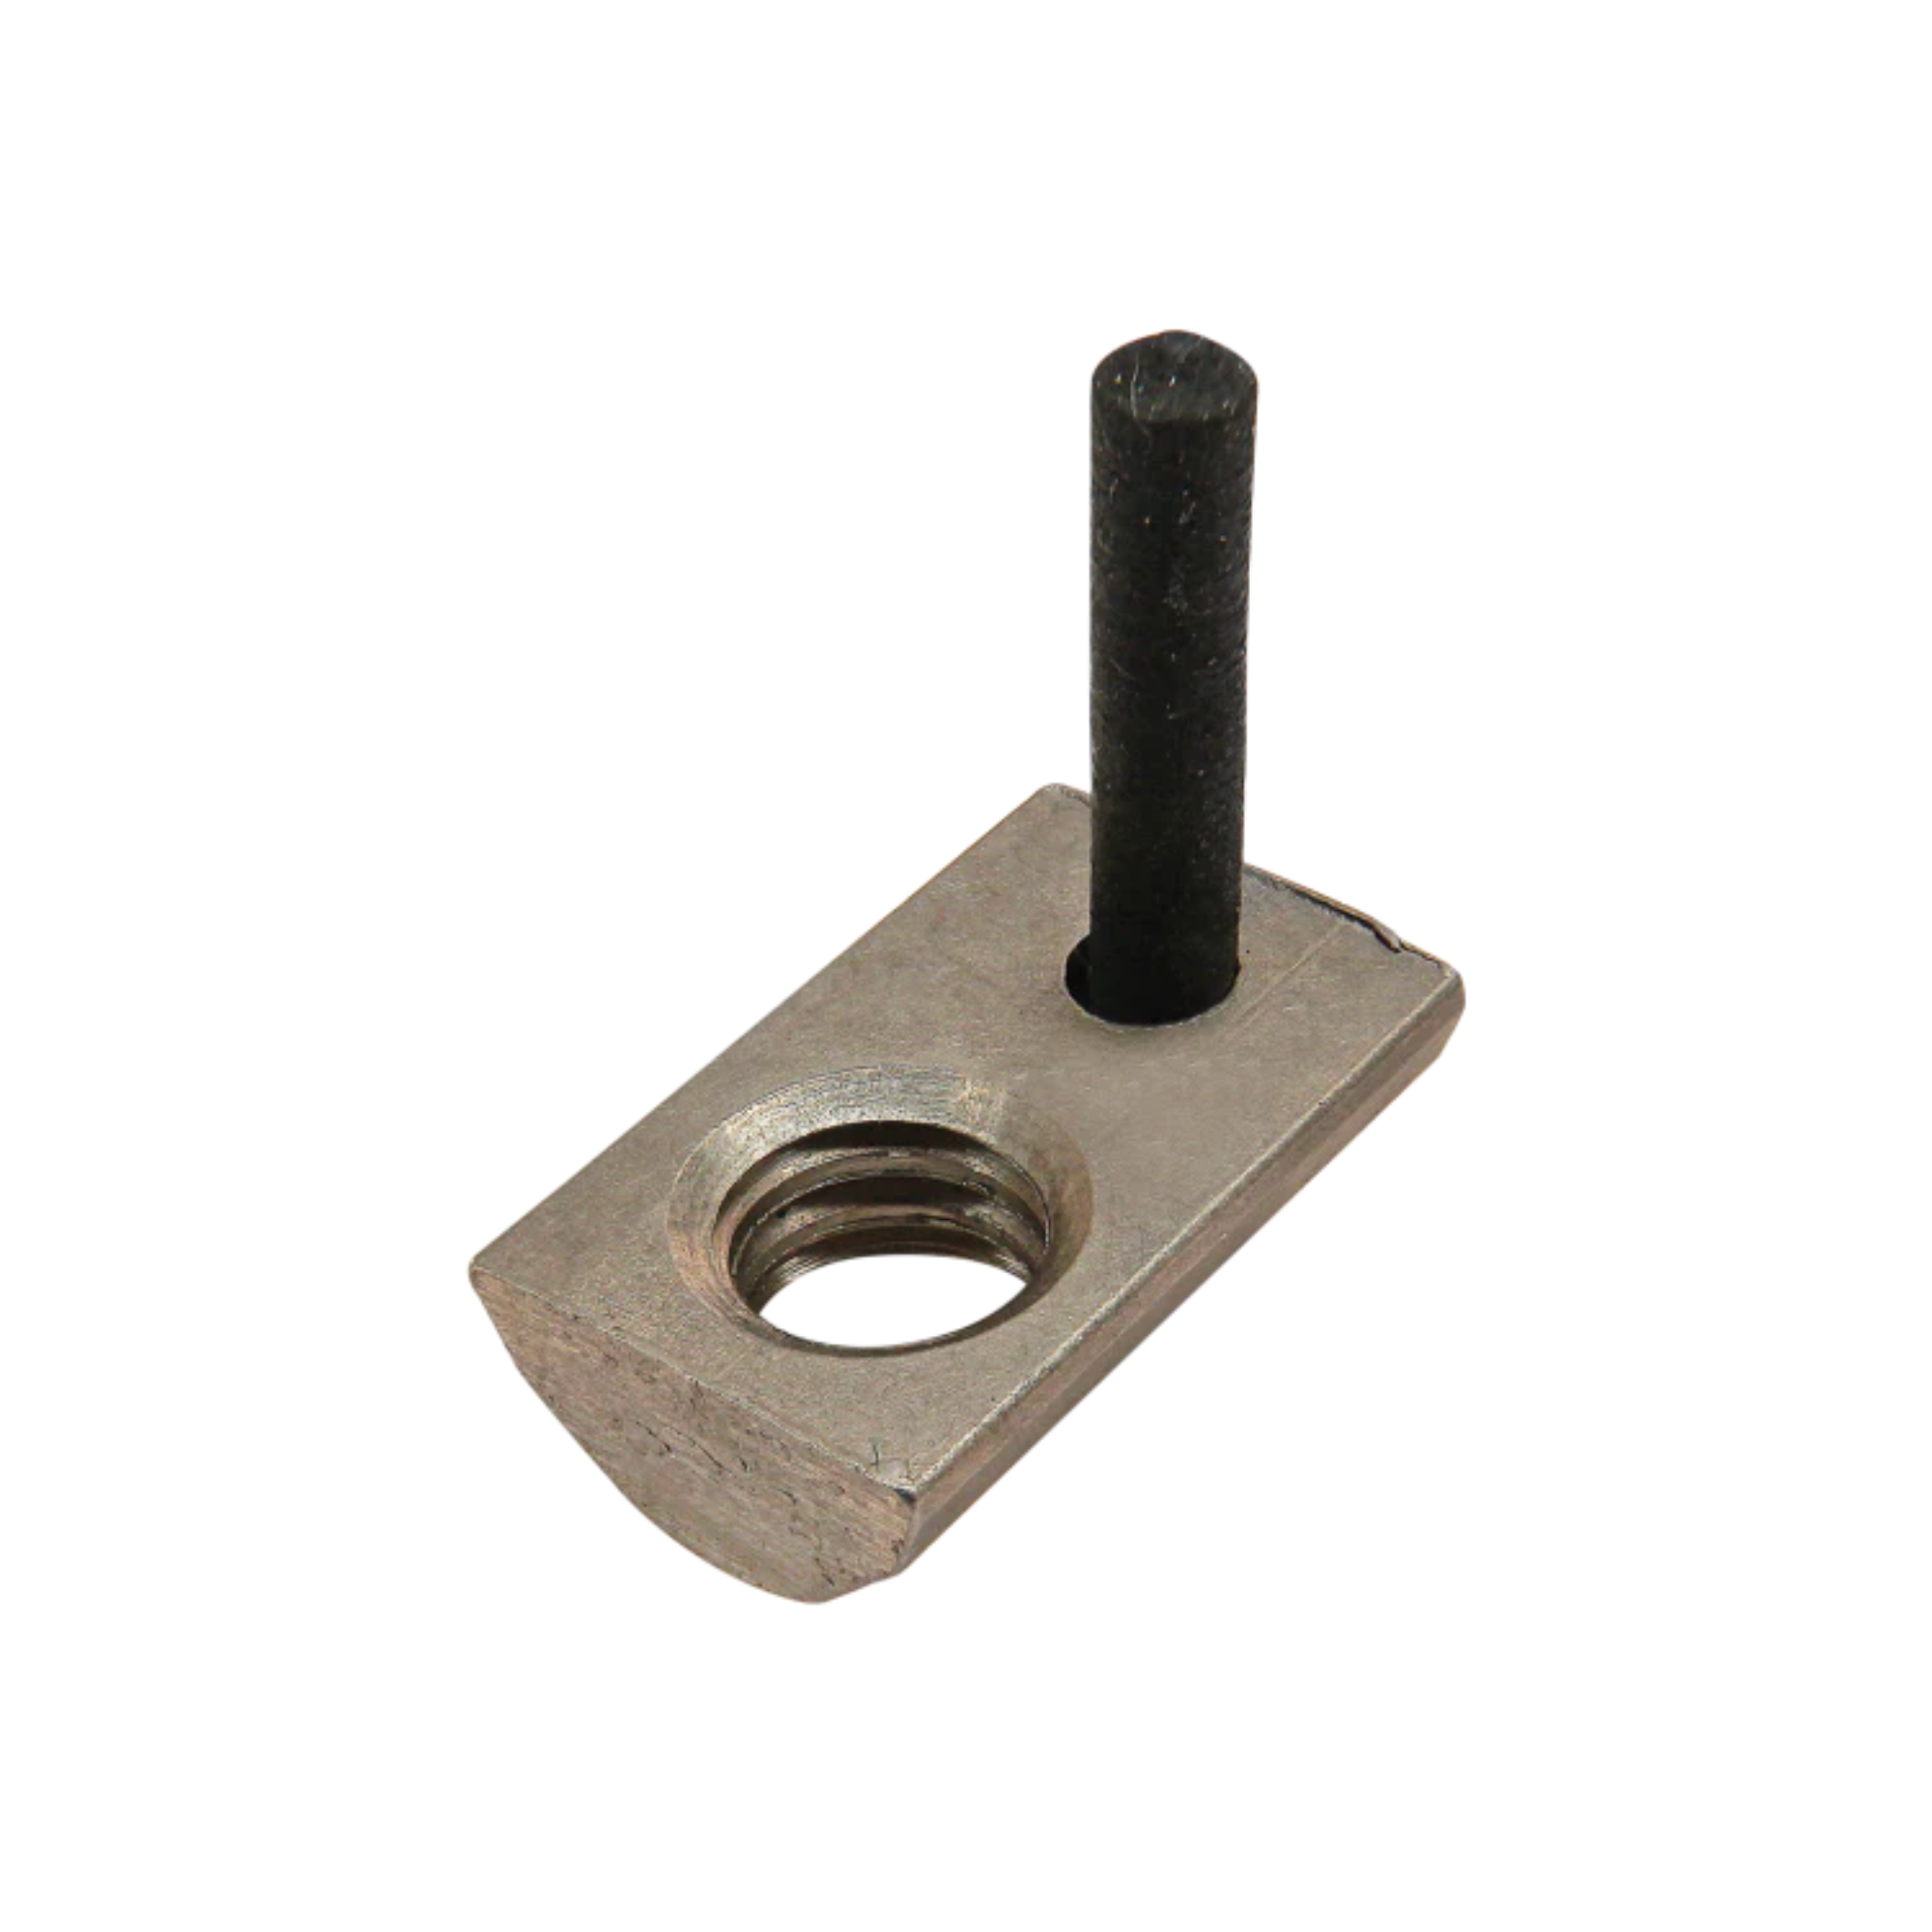 metal, rectangular t-nut with a rounded bottom and a flat top, and large threaded hole on the left side and a small hole on the right side with a cylindrical handle inserted